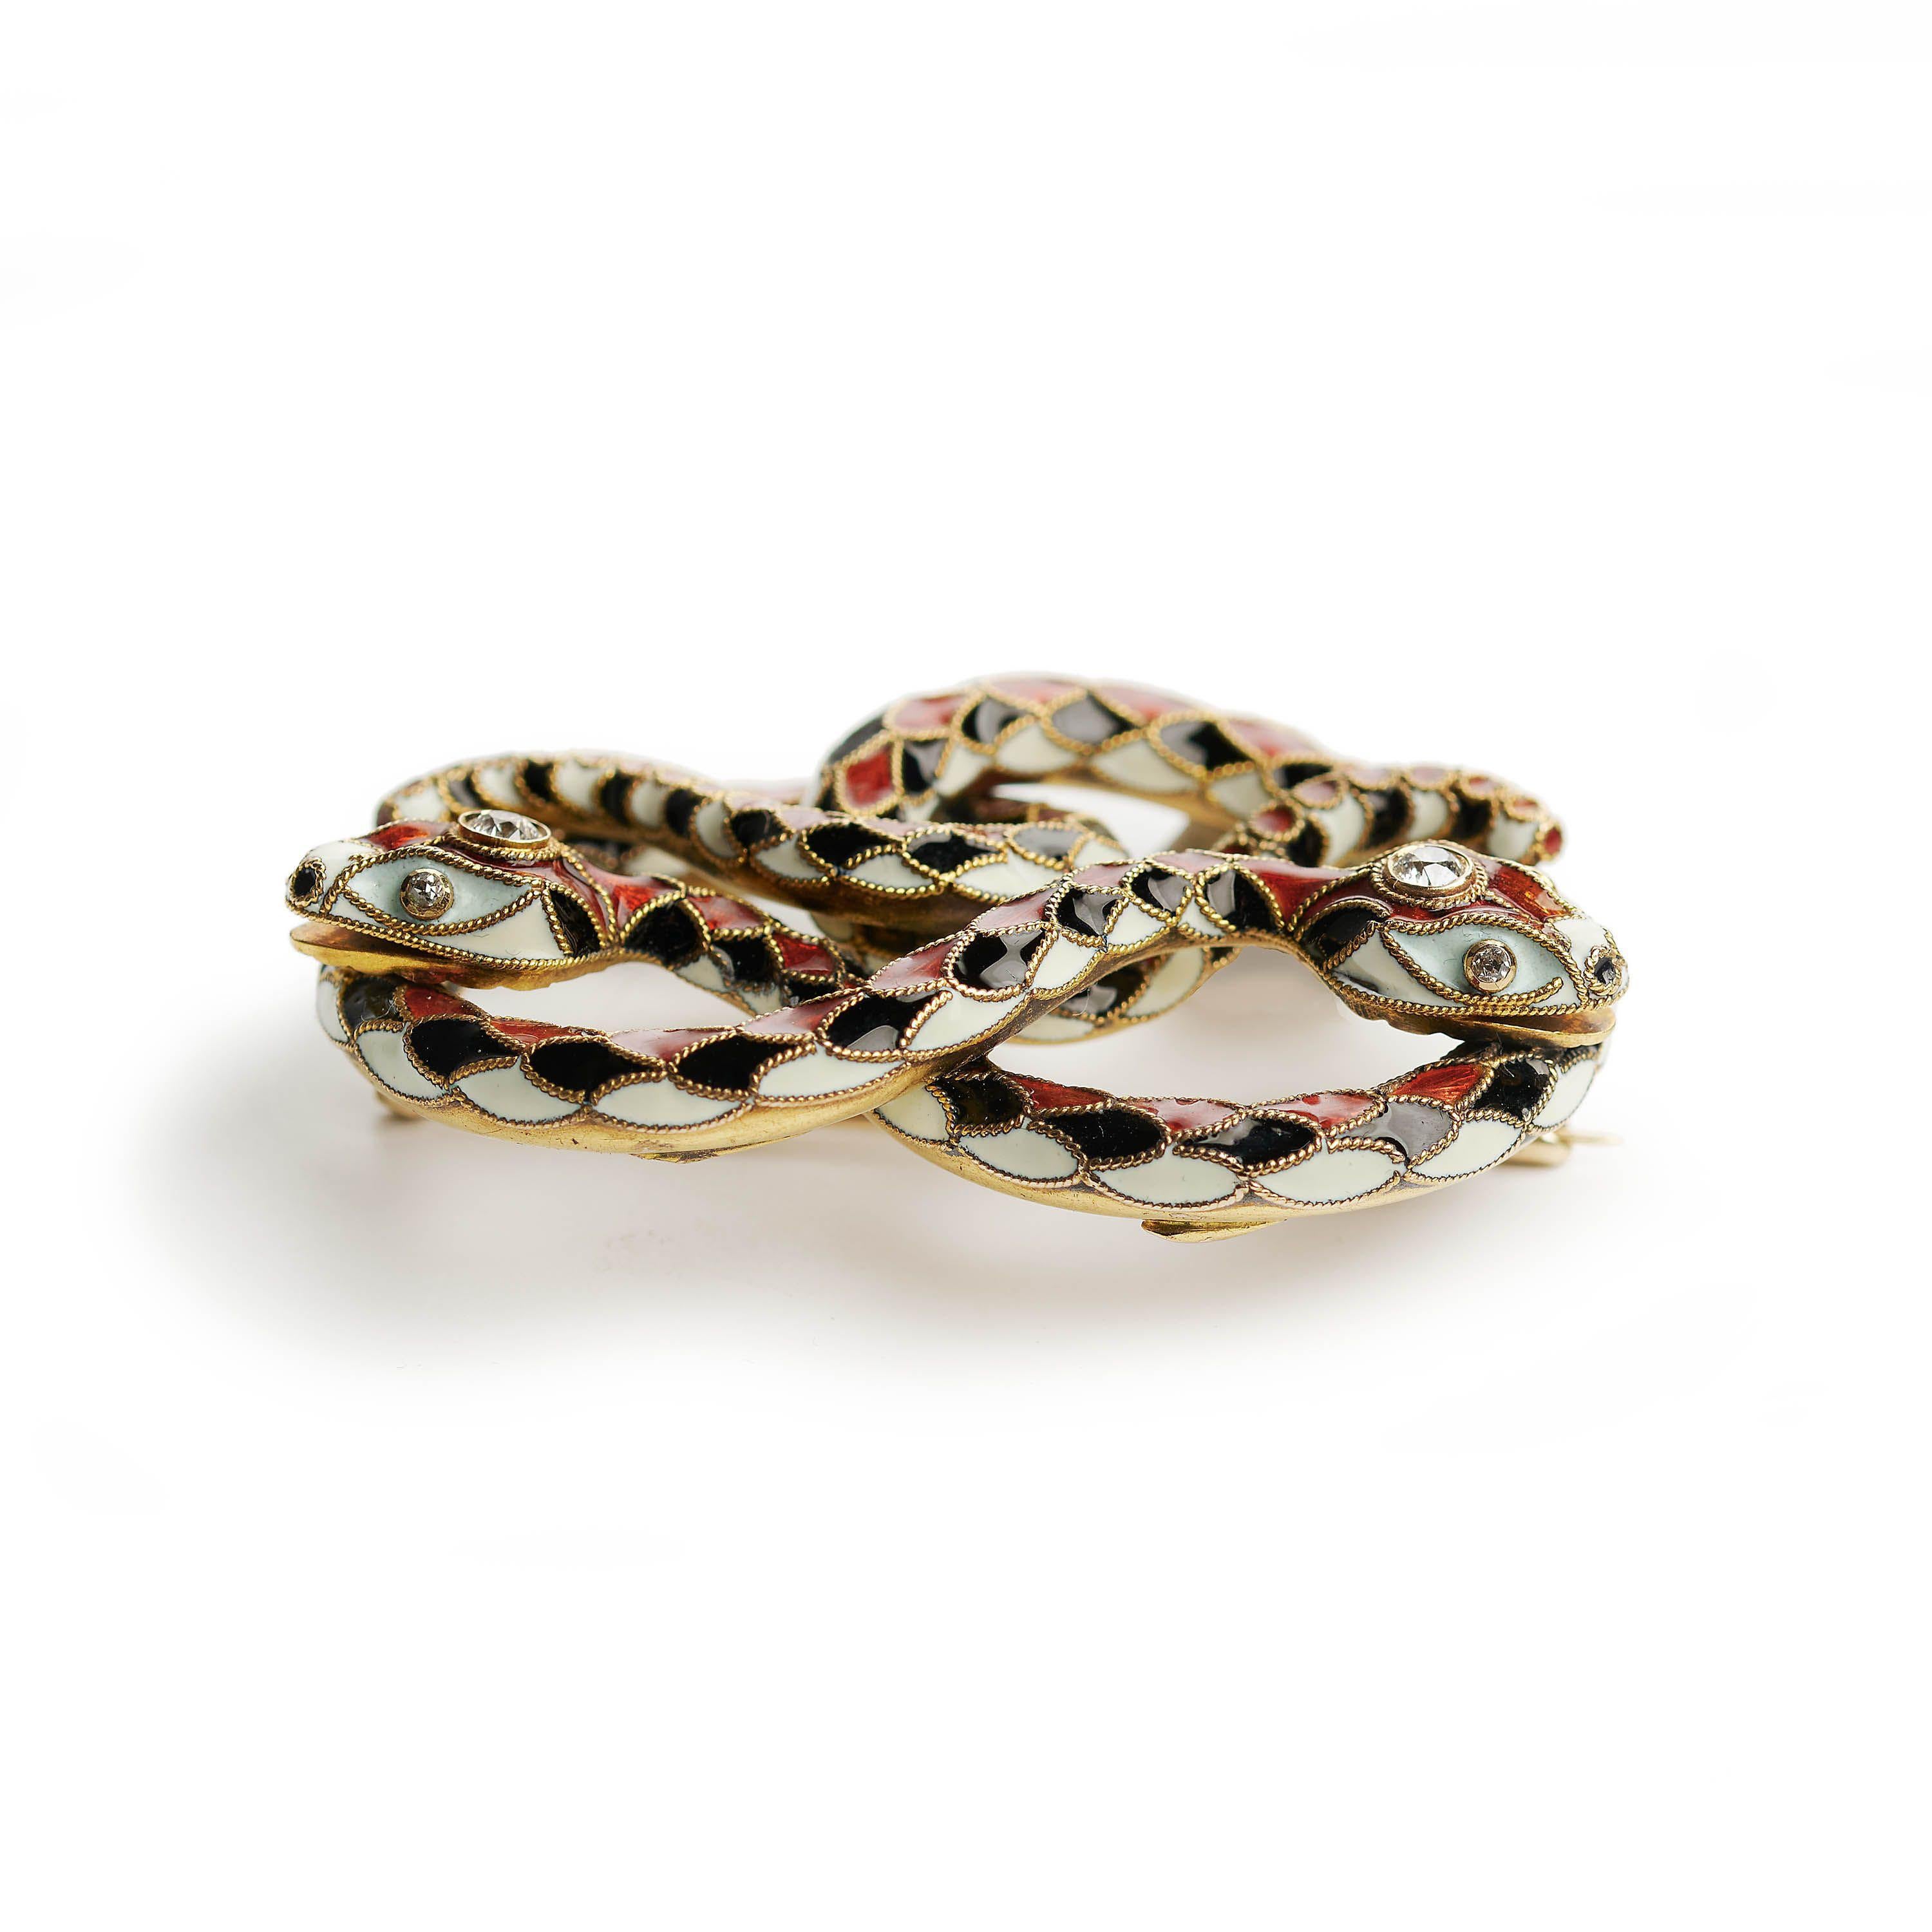 Art Deco Early 20th Century Enamel Diamond And Gold Double Snake Brooch, Circa 1920